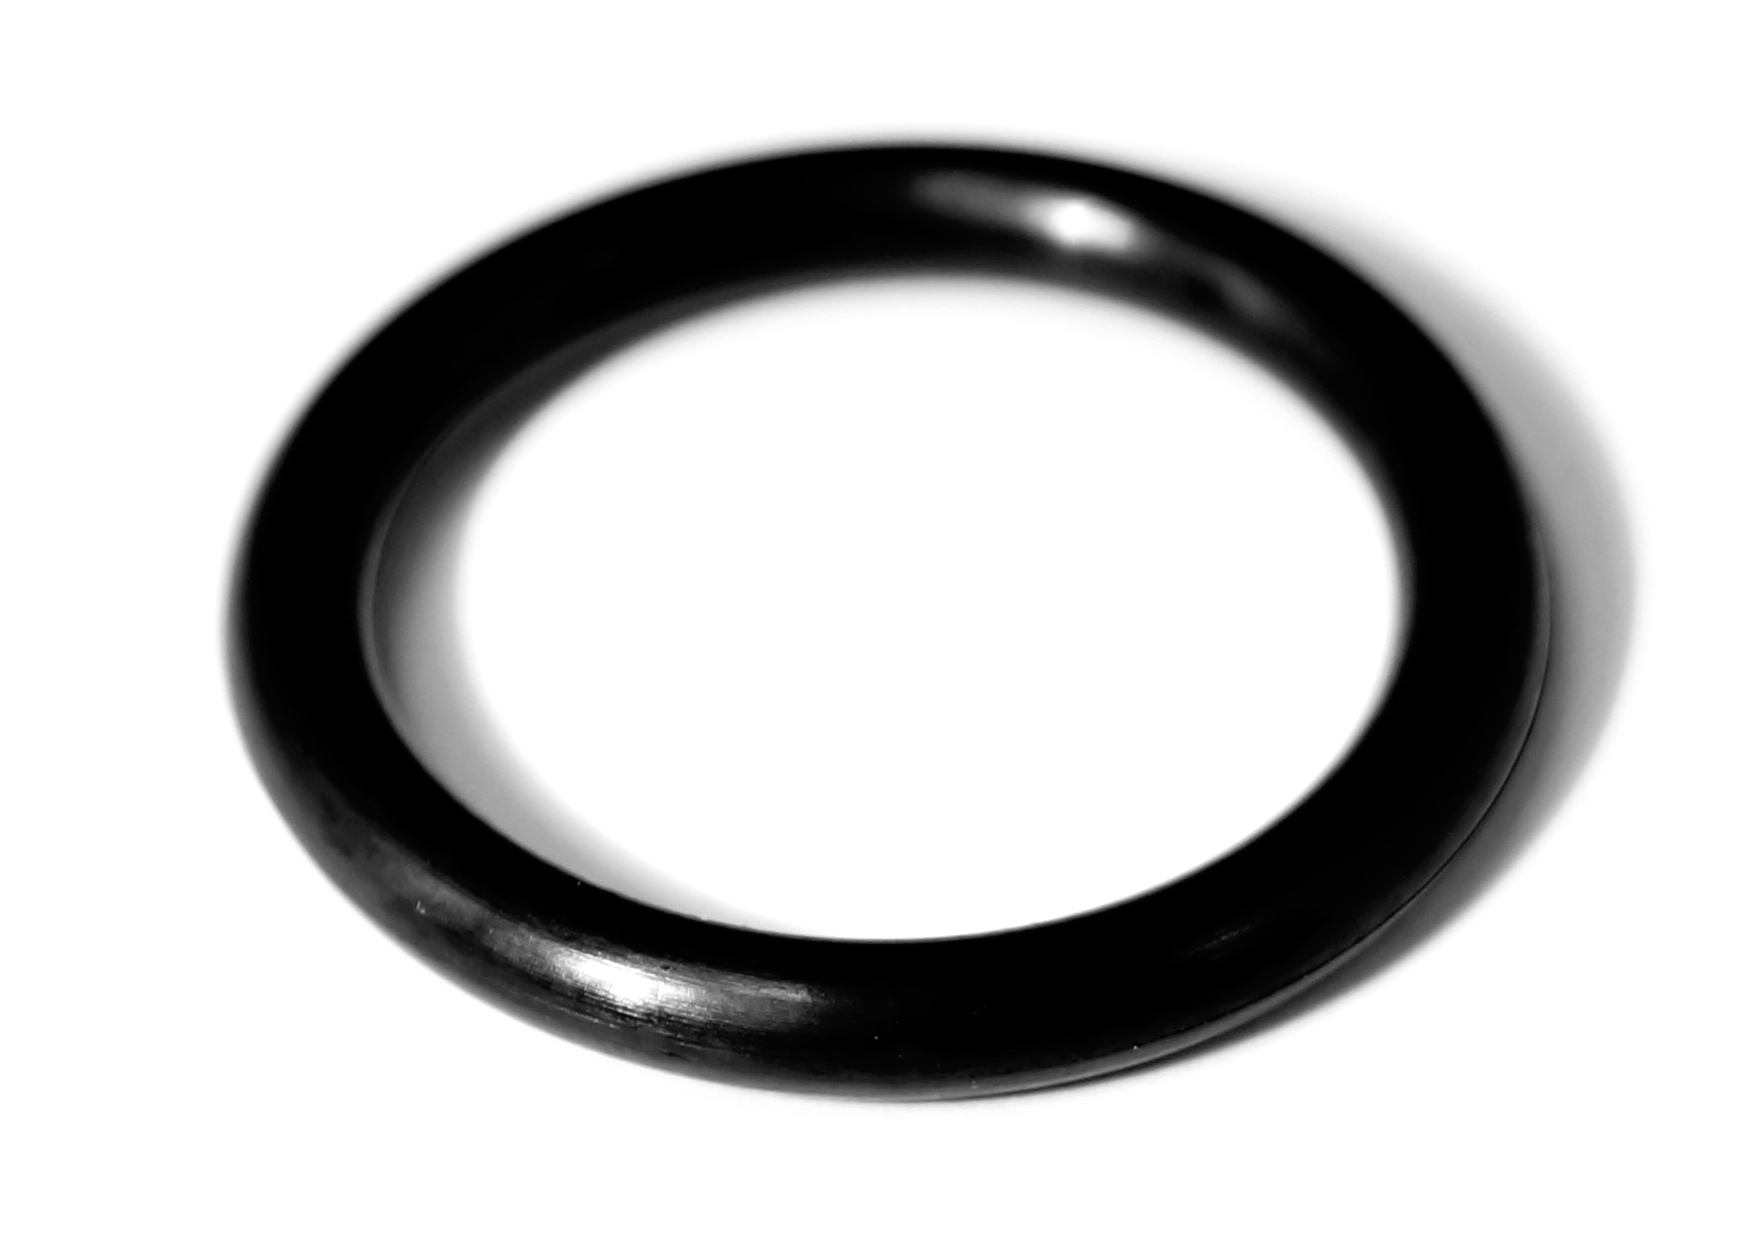 ID 59mm OD 5mm BS332 1x seal EPM O-ring 69mm Cross section 